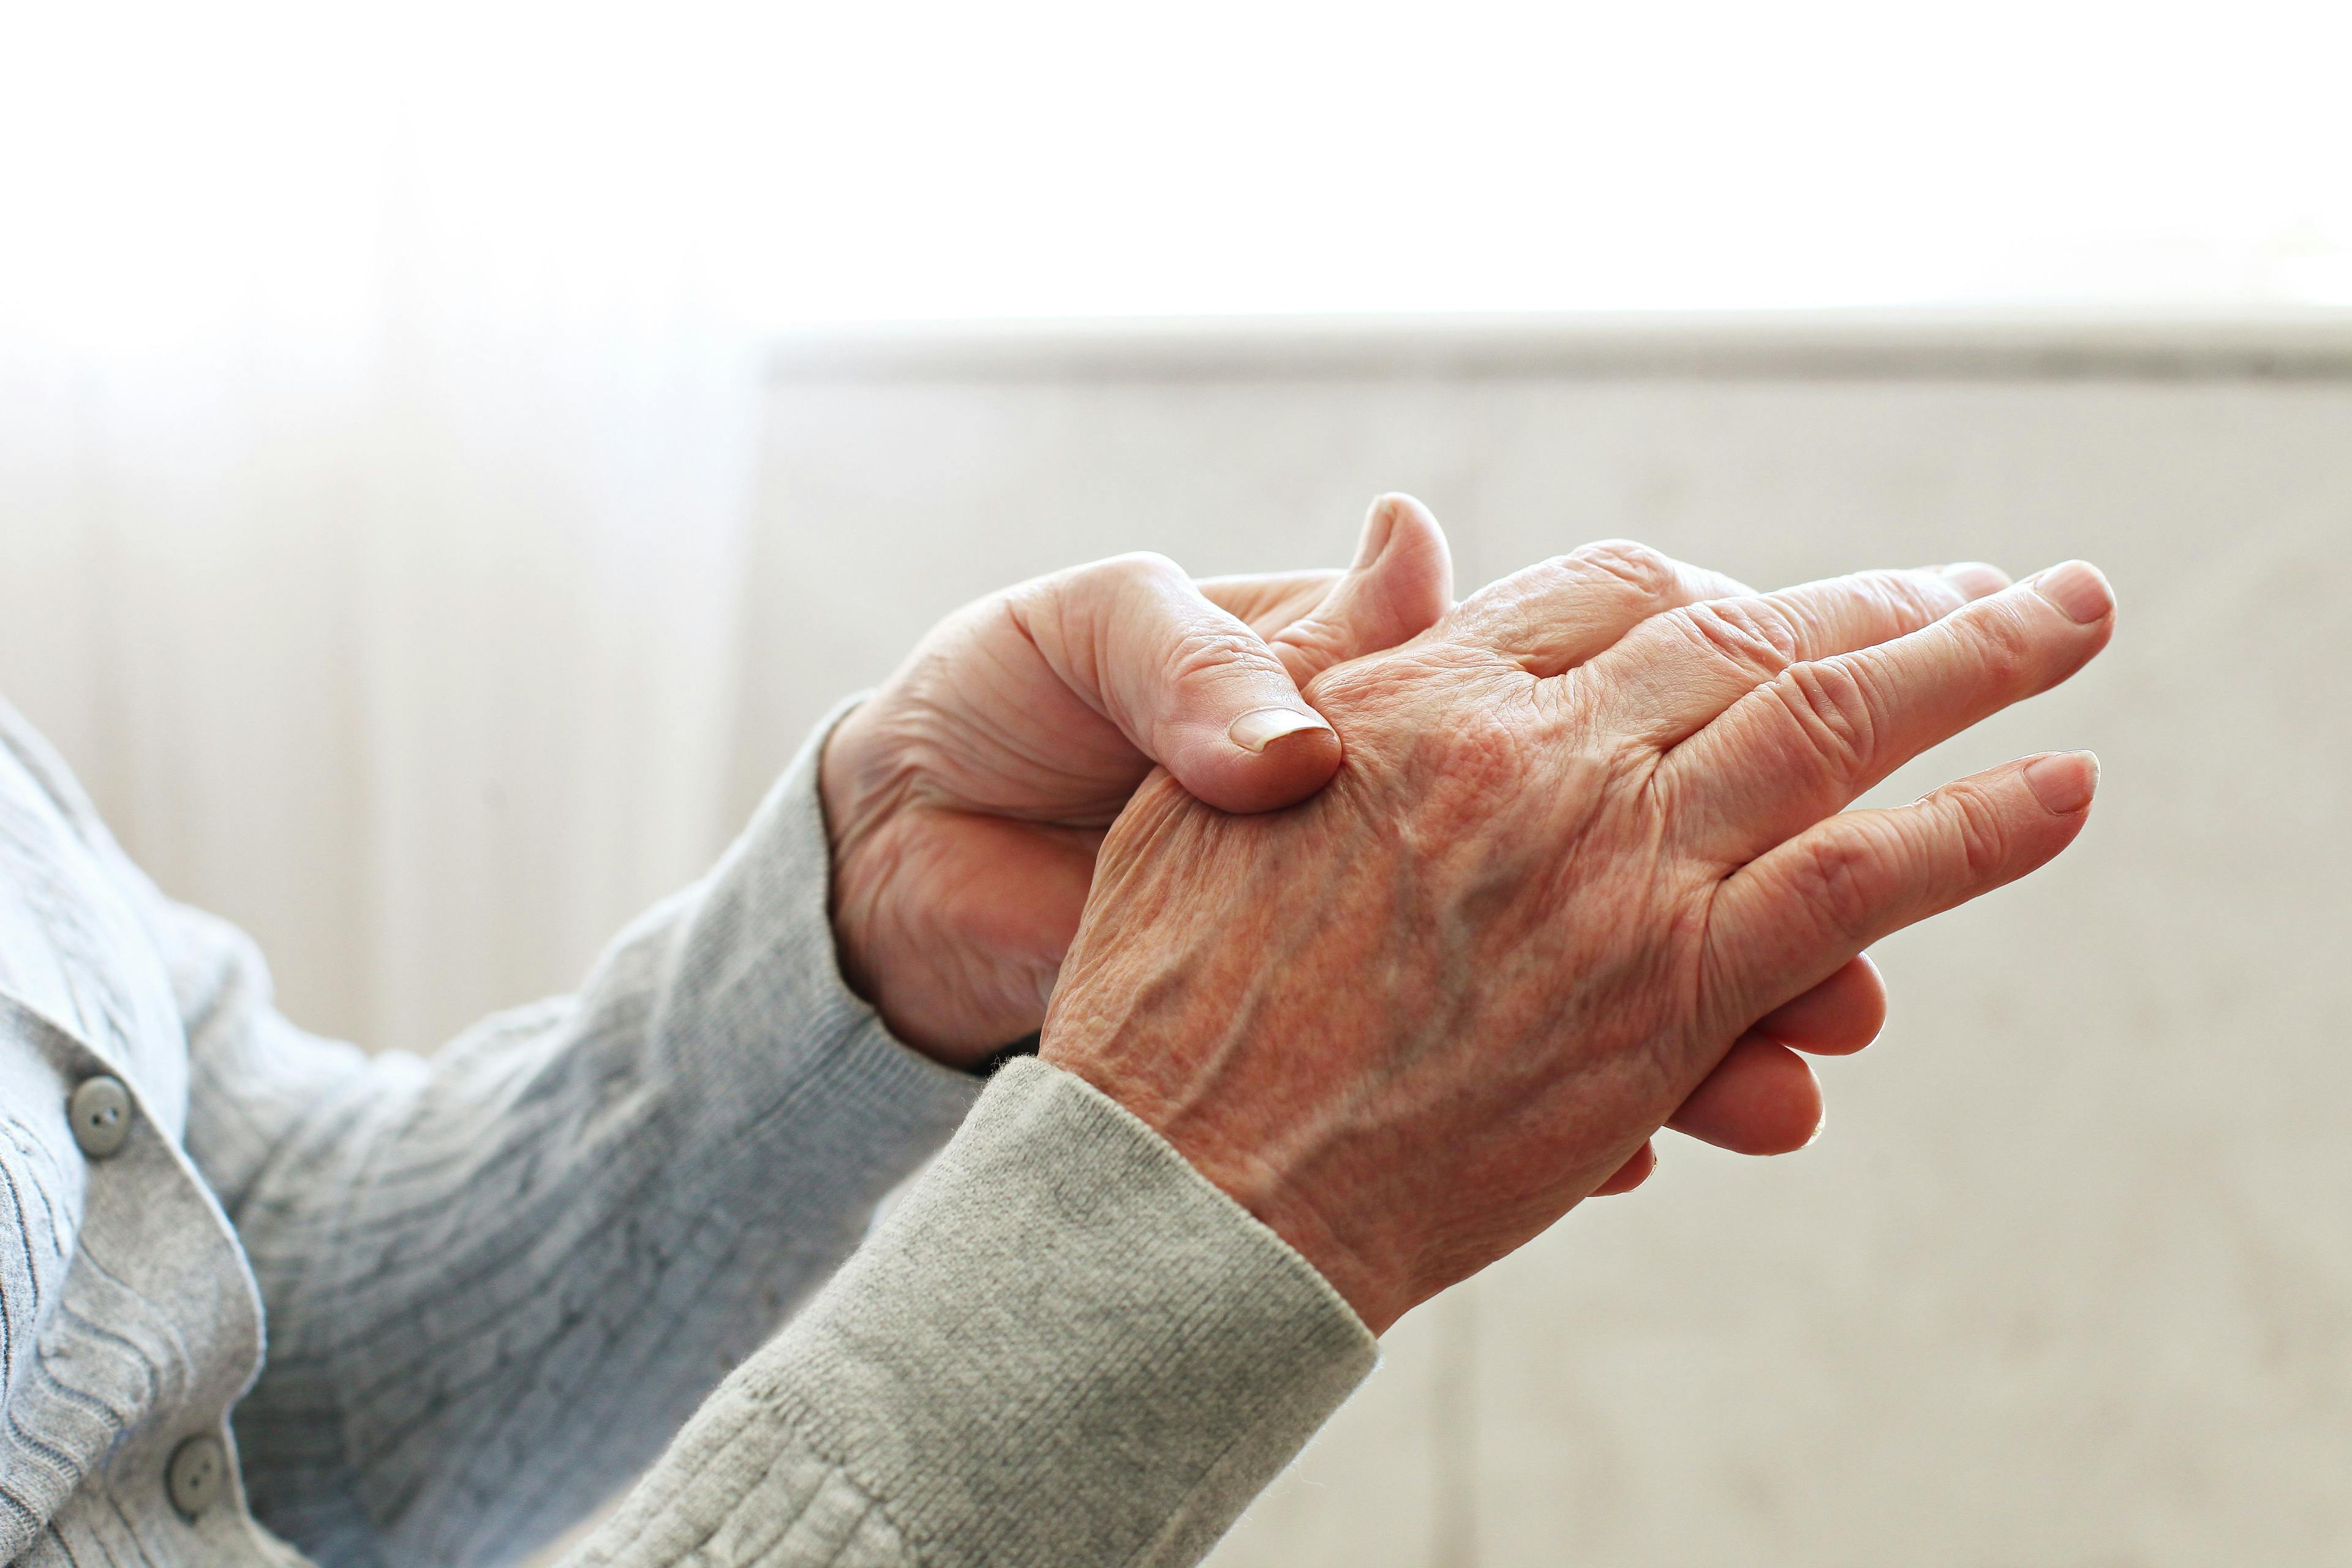 elderly patient with arthritis holding hand in pain | Image Credit: Evrymmnt - stock.adobe.com